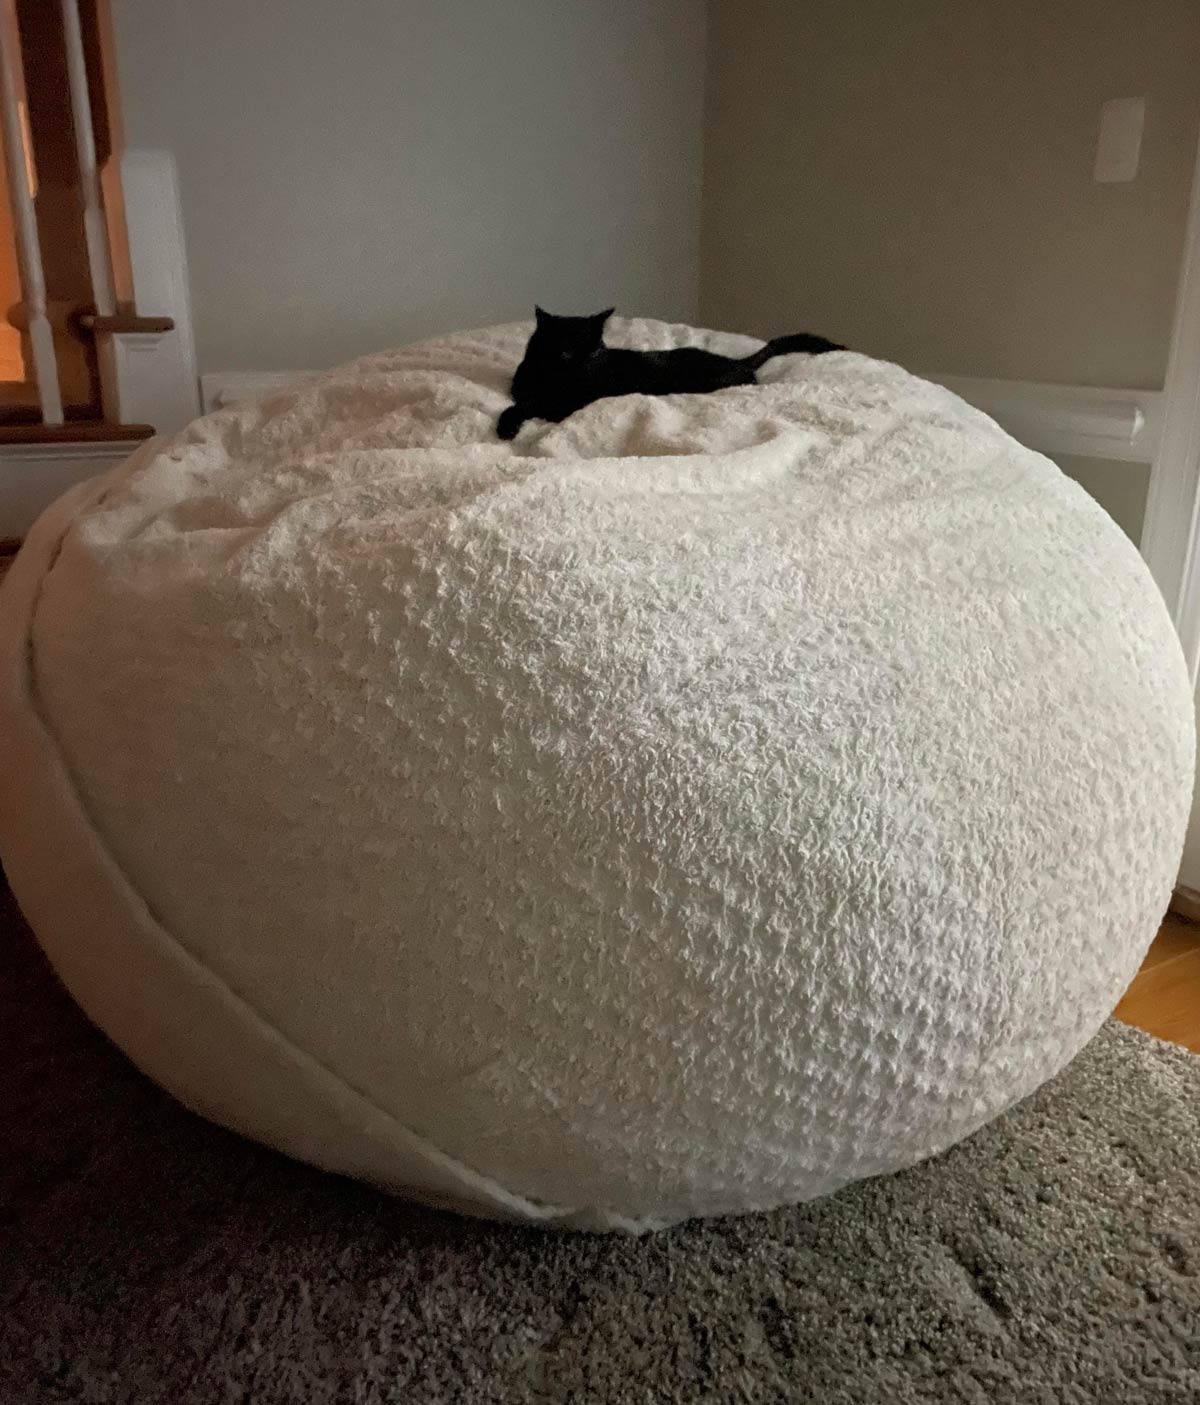 New cat bed. Whatcha think?